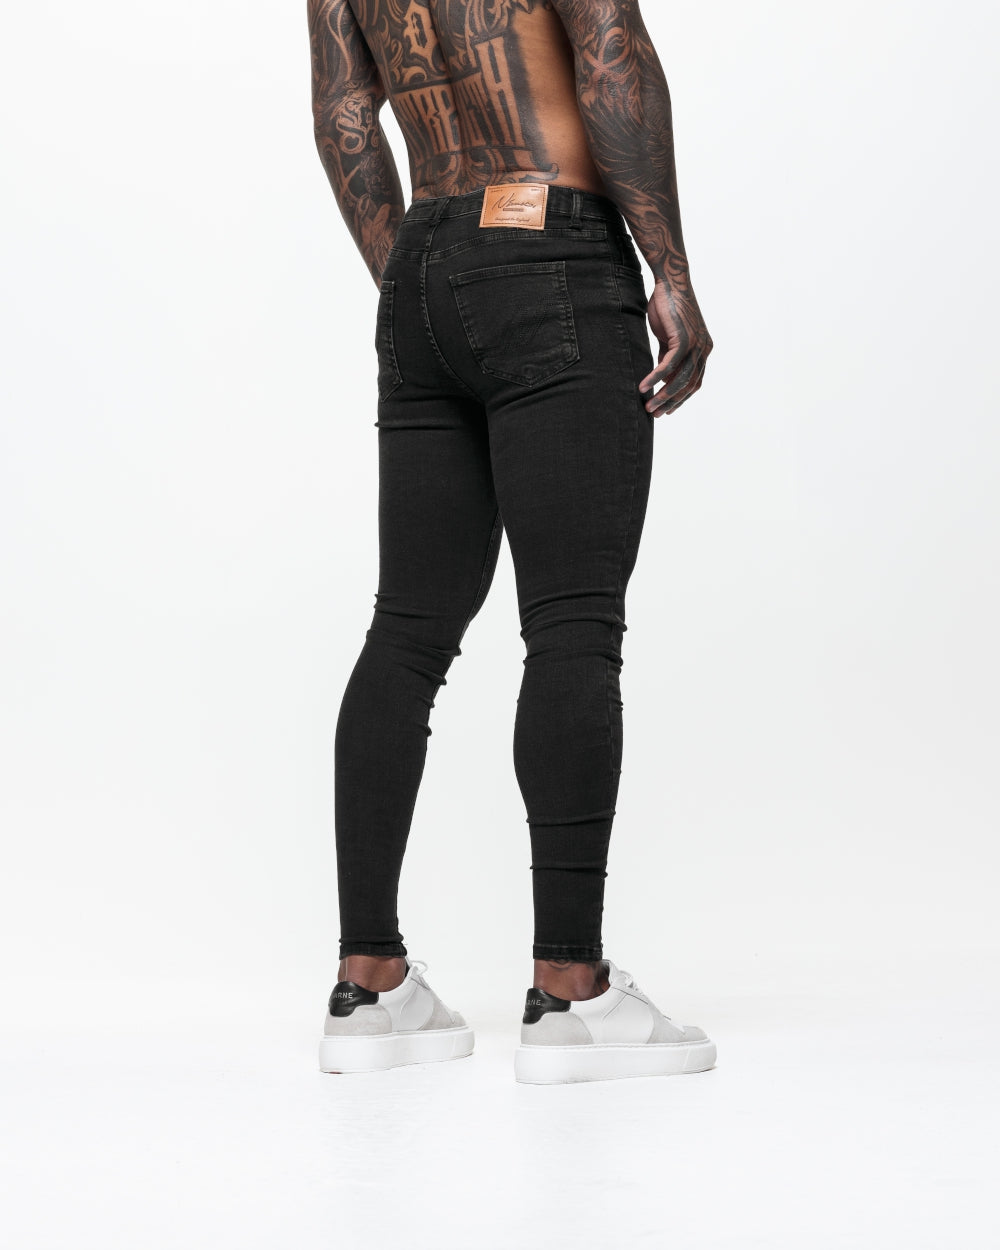 Super Skinny Spray On Jeans – Washed Black Ripped & Repaired - Nimes